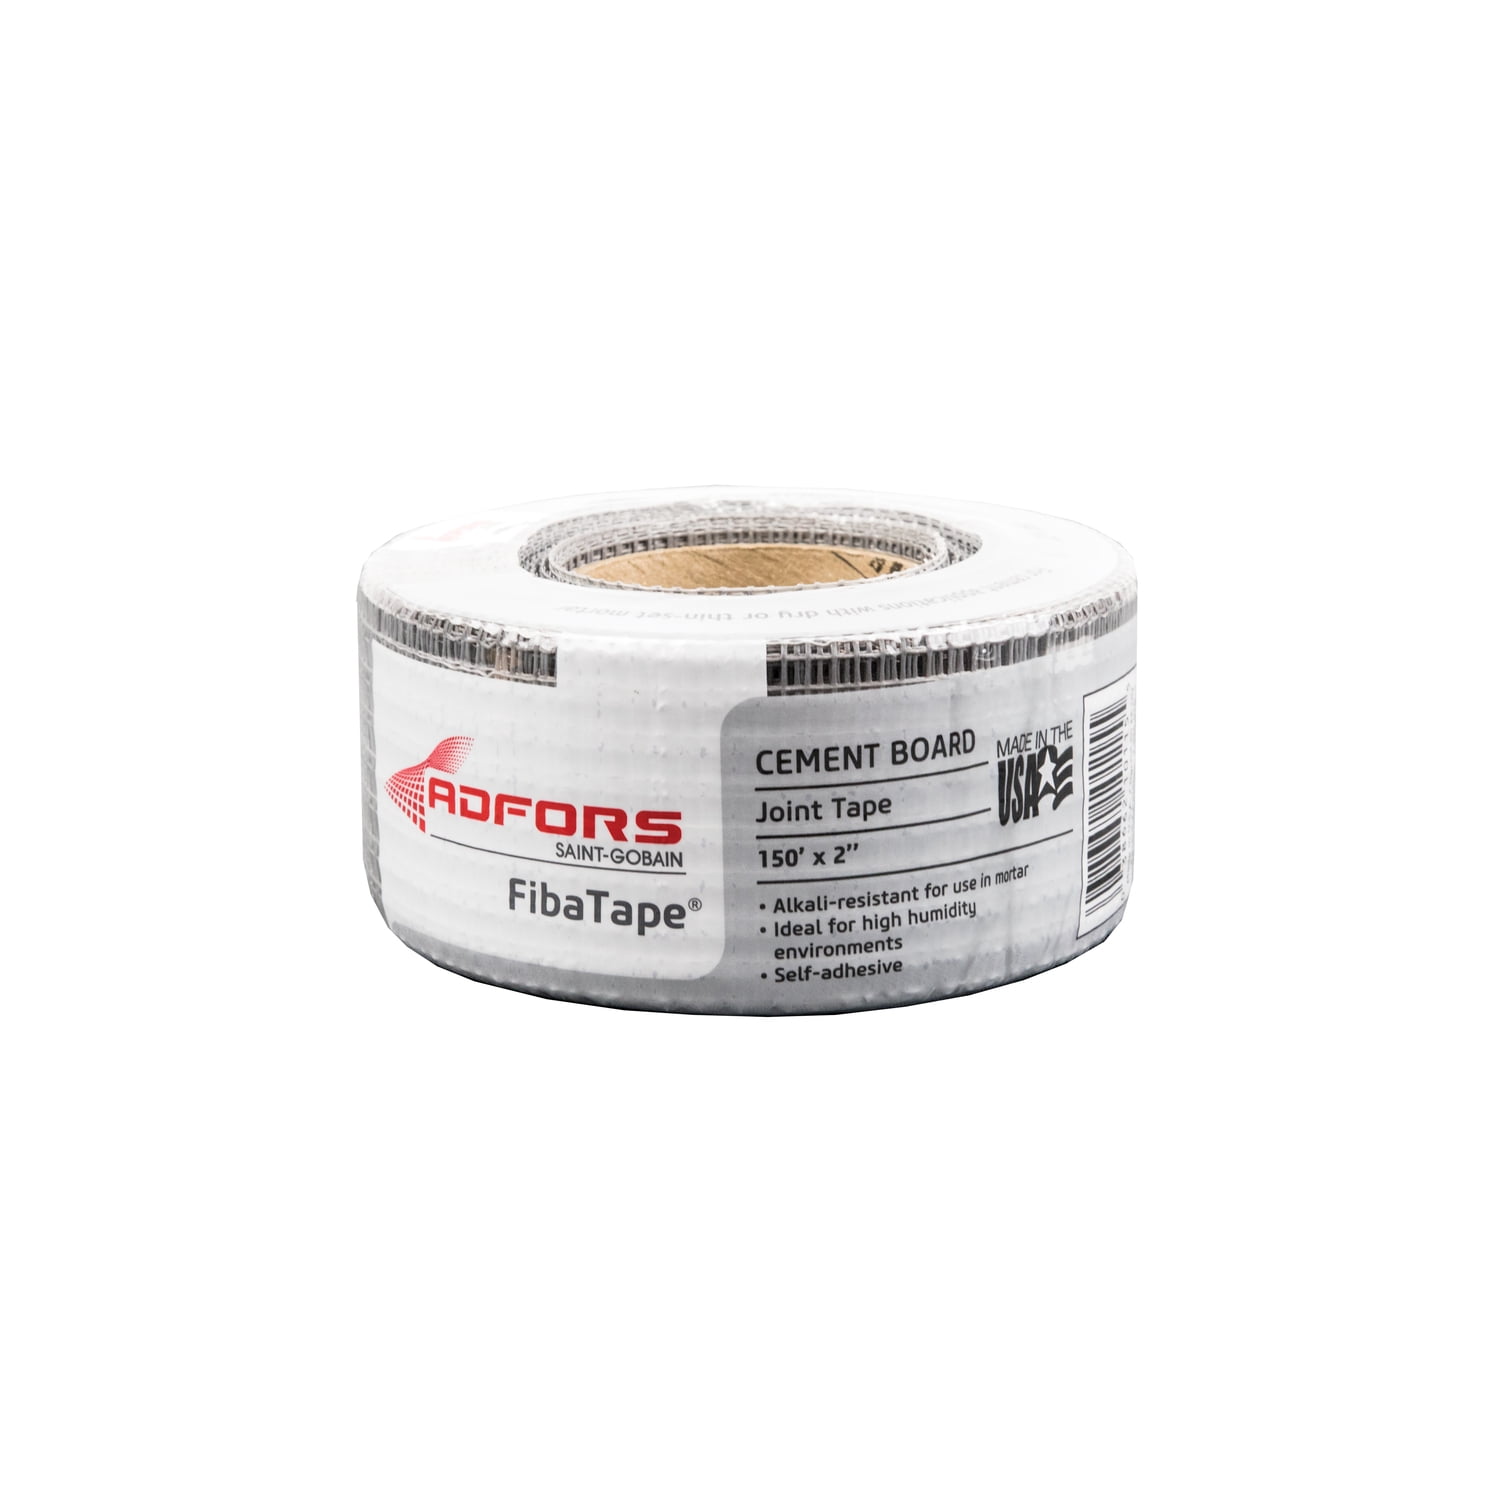 Crack-Tape Drywall Joint Tape Plaster Roll Patching Repair Moisture Tolerant 